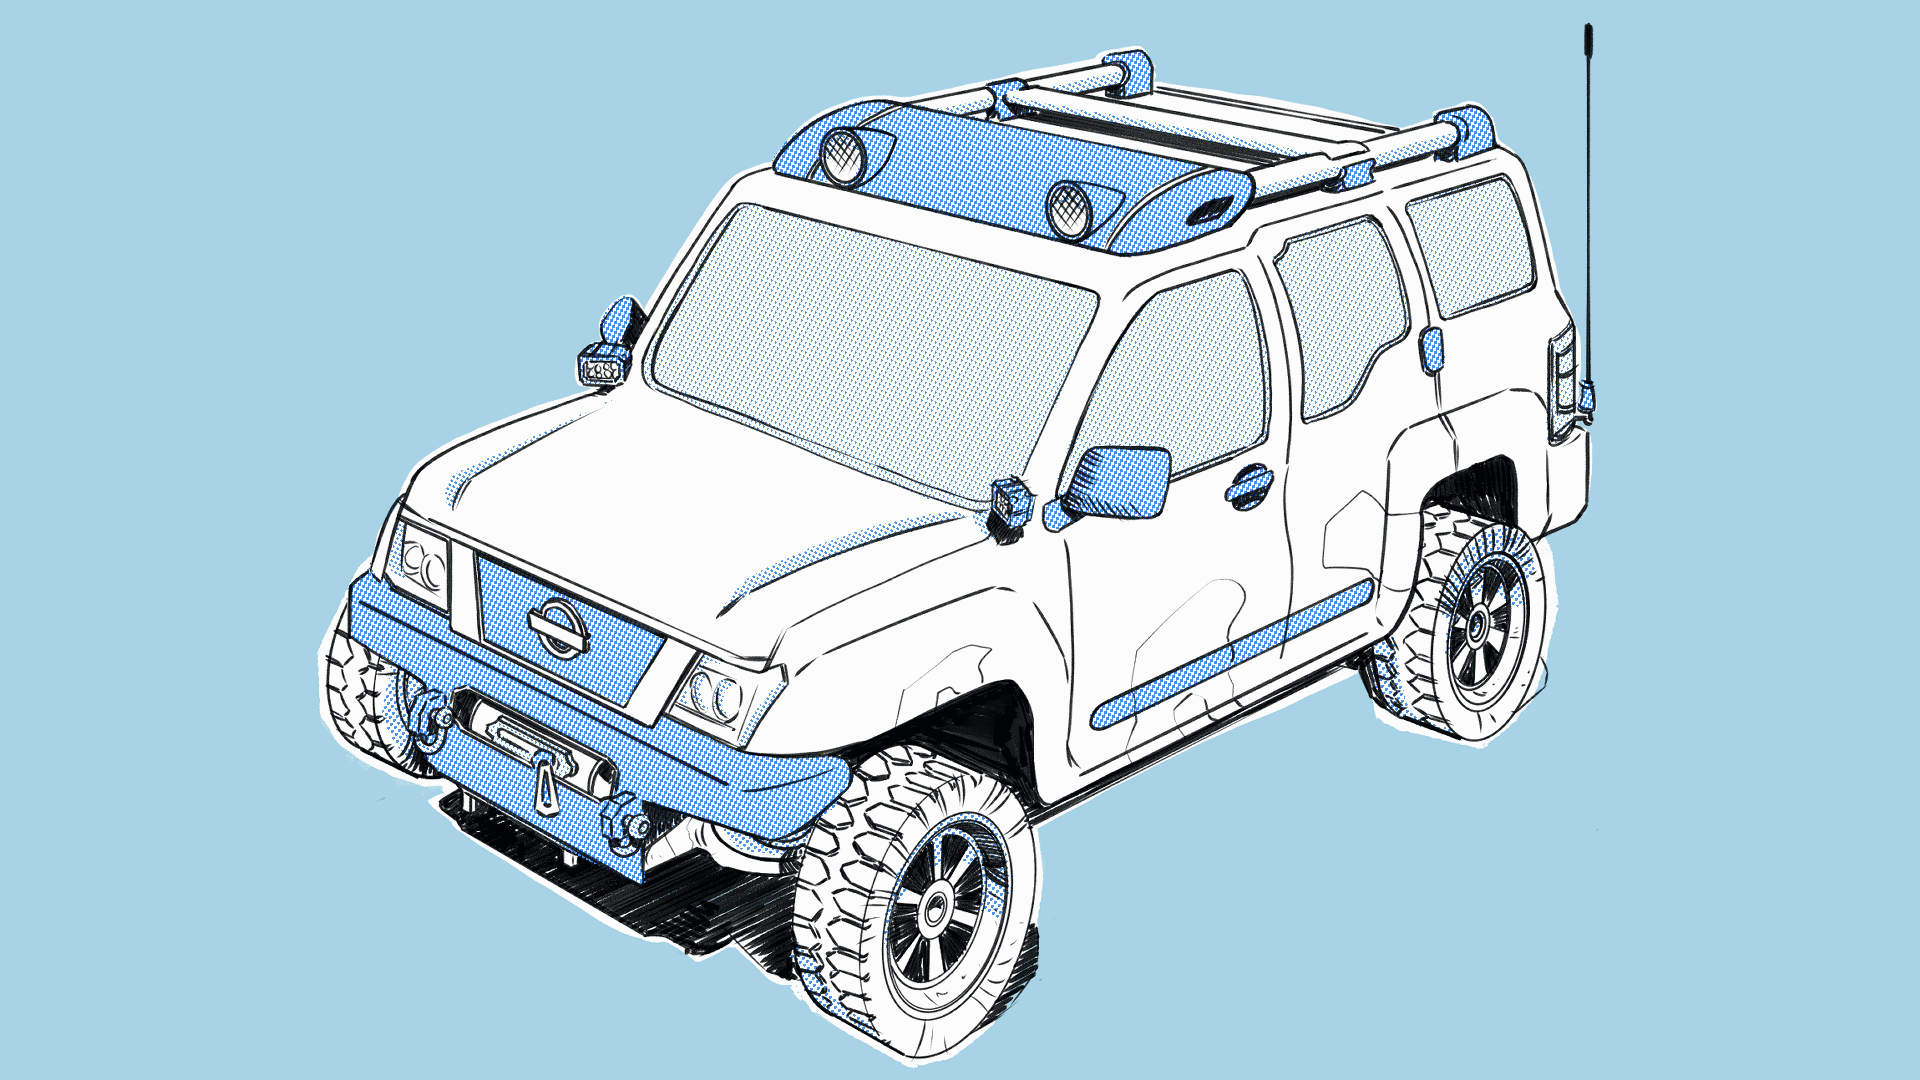 Going offroad for a better design system